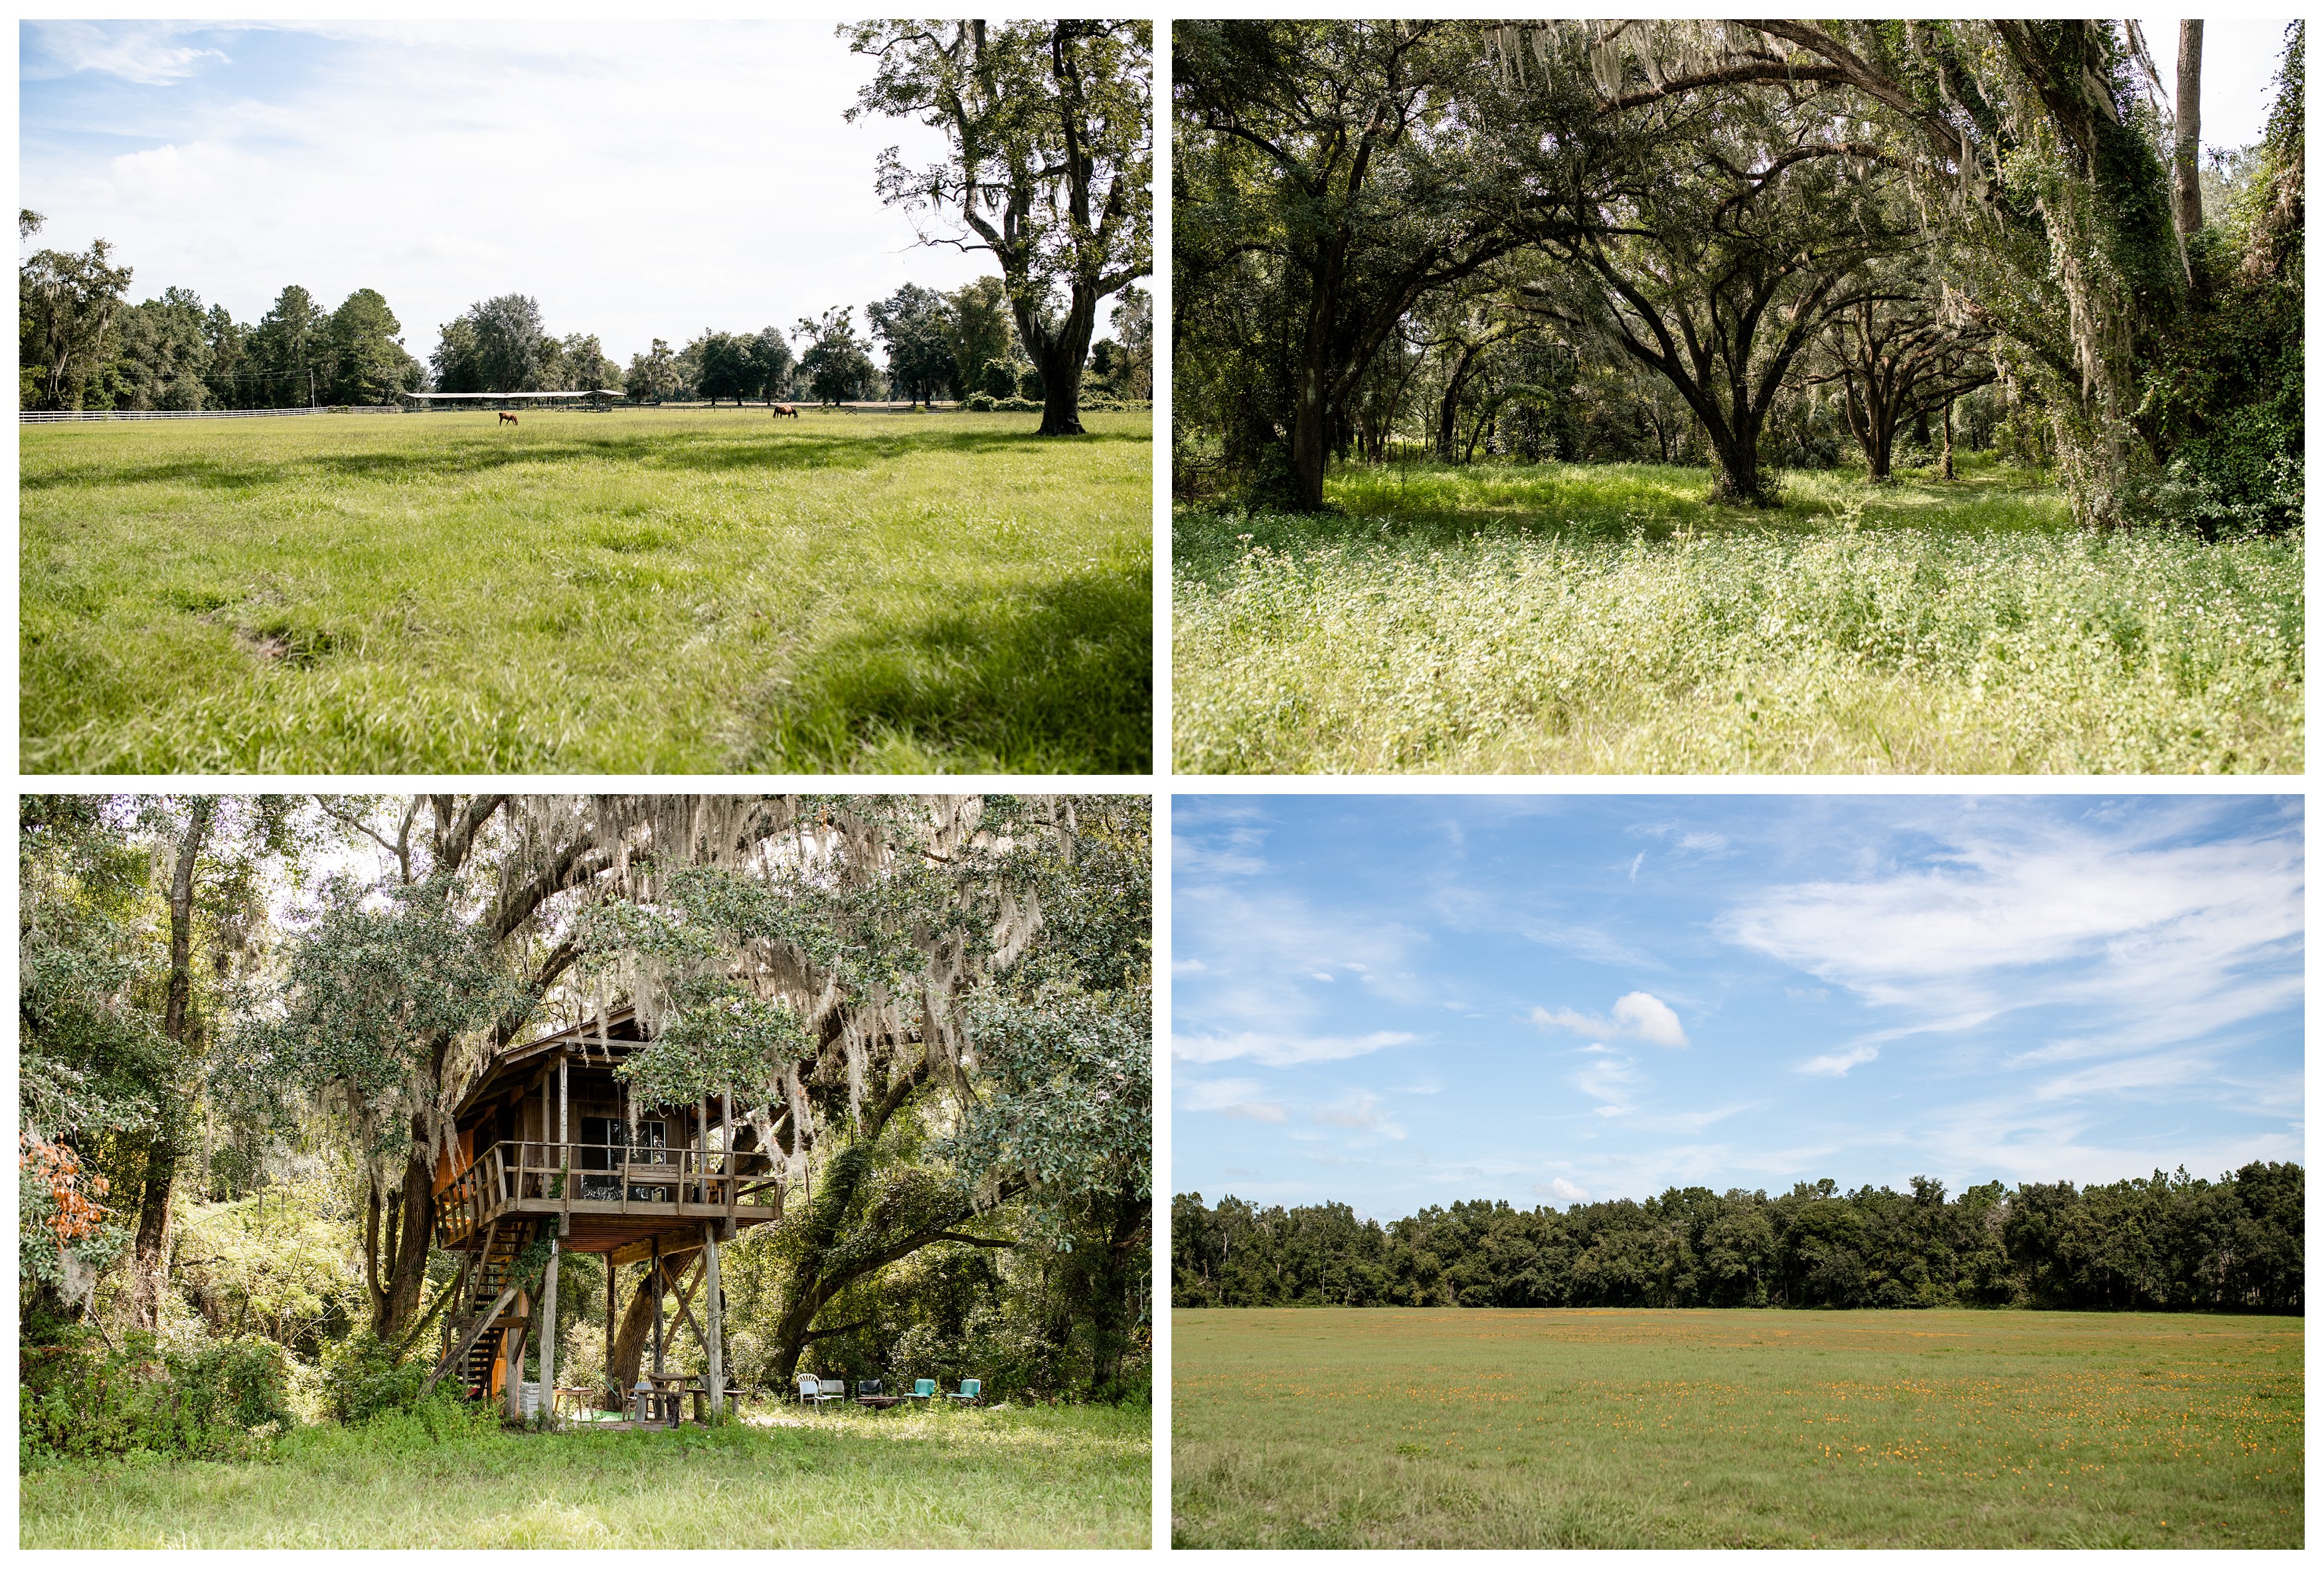 The beautiful property of Valhalla Farm is perfect for trail riding horses.